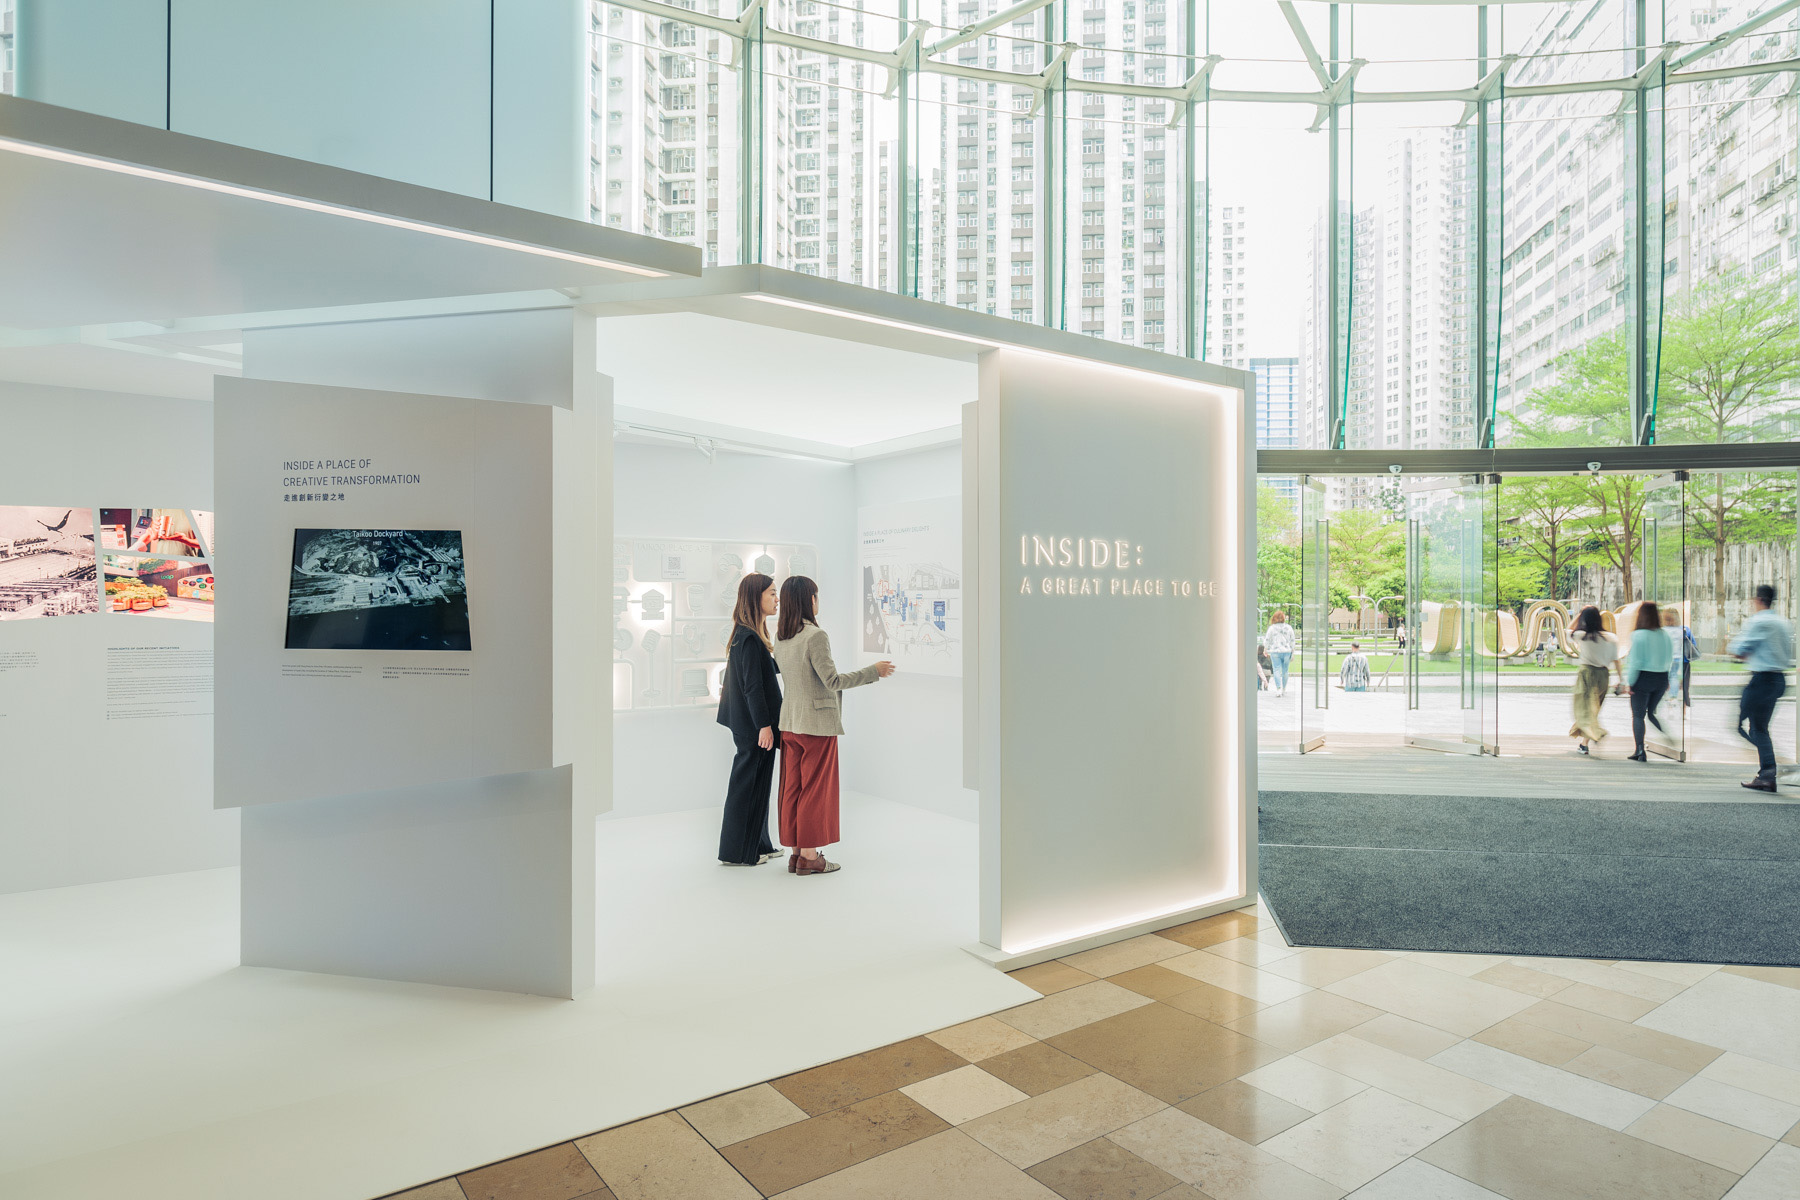 “Inside: A Great Place to Be” Exhibition